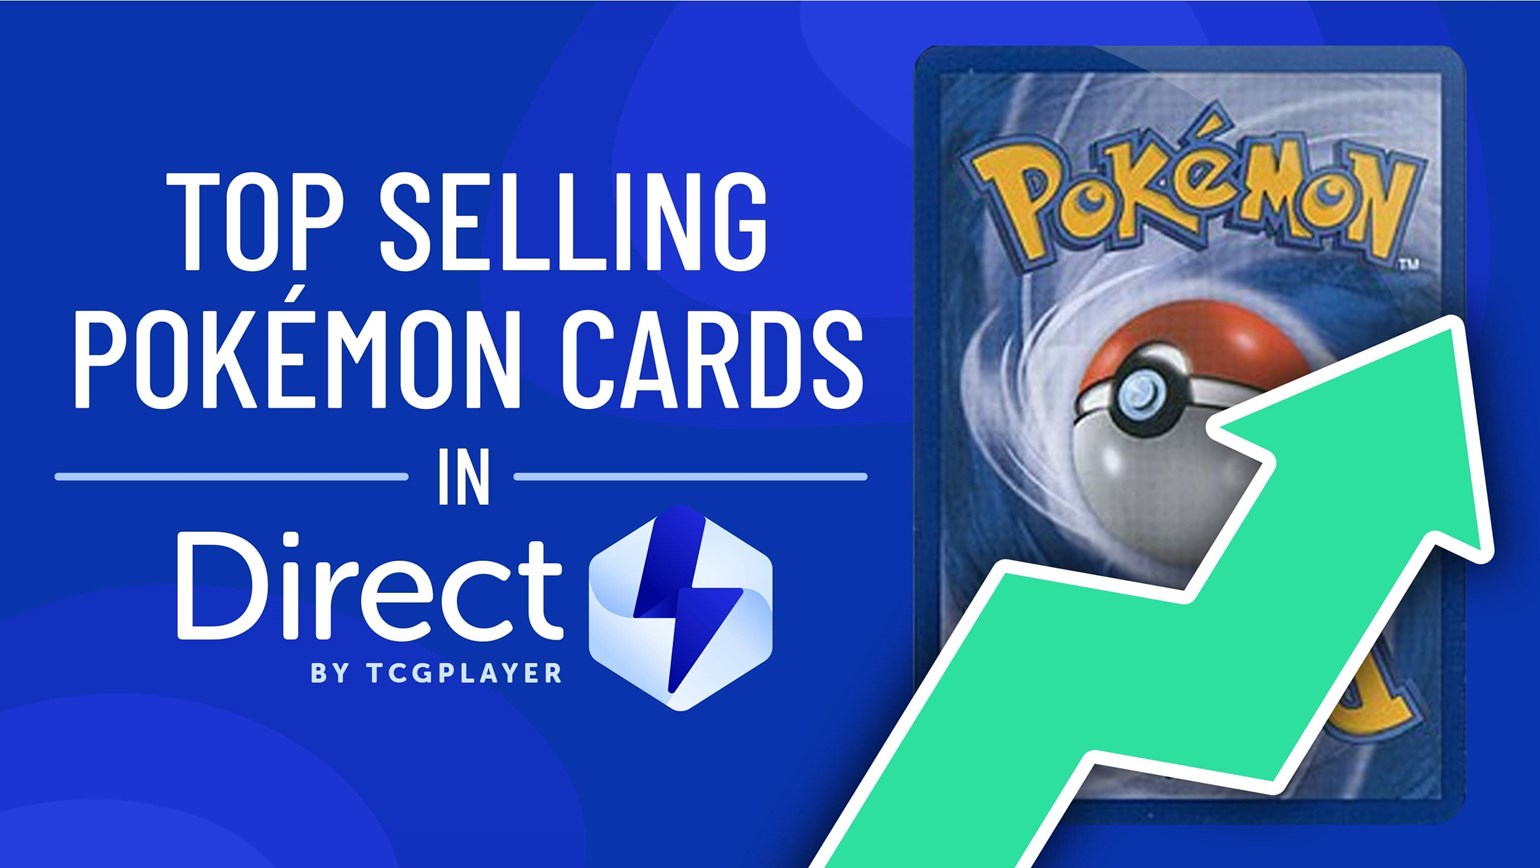 October Top Selling Pokémon Cards in Direct by TCGplayer